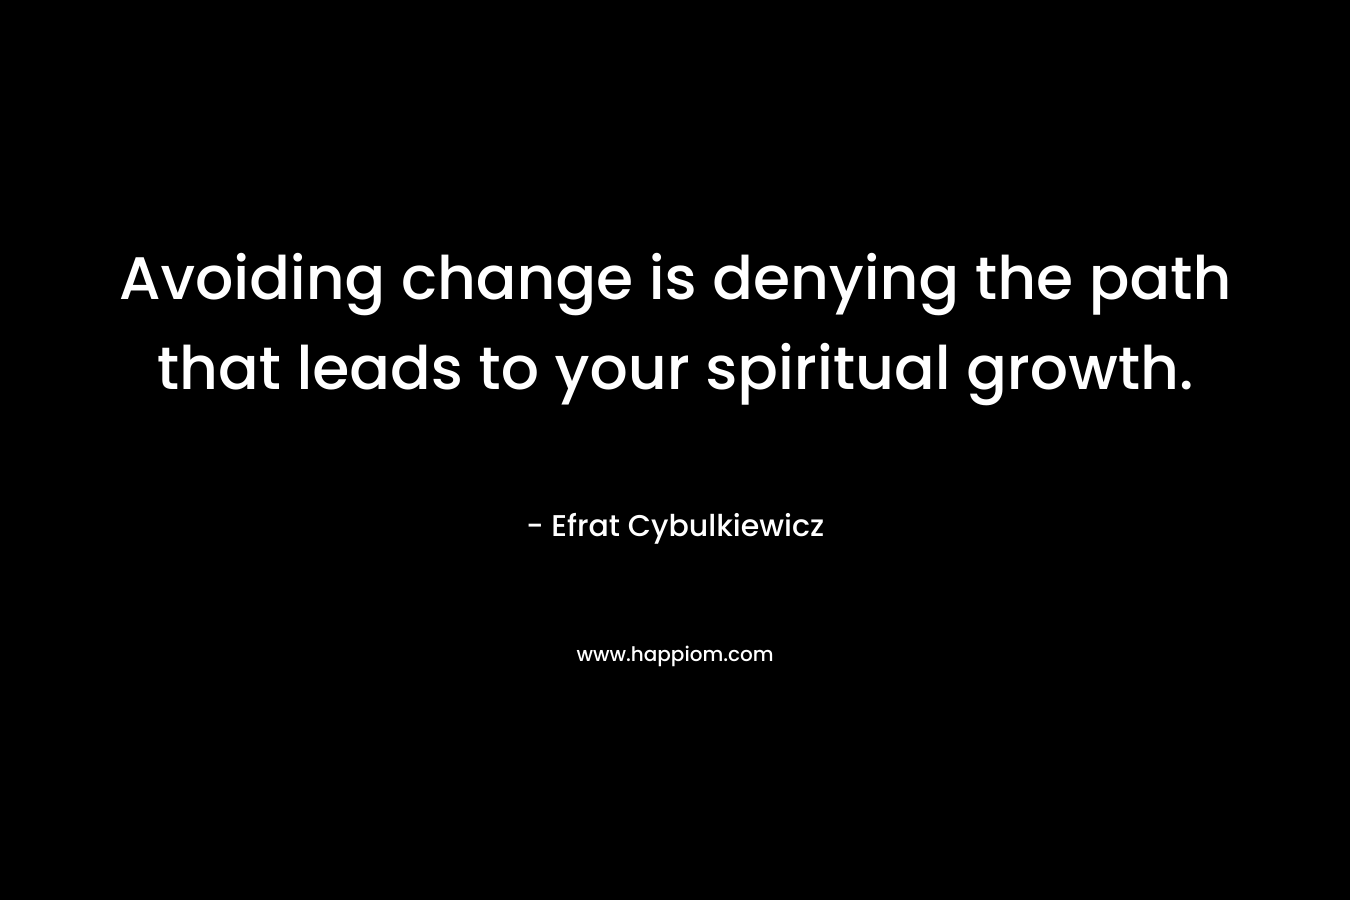 Avoiding change is denying the path that leads to your spiritual growth.